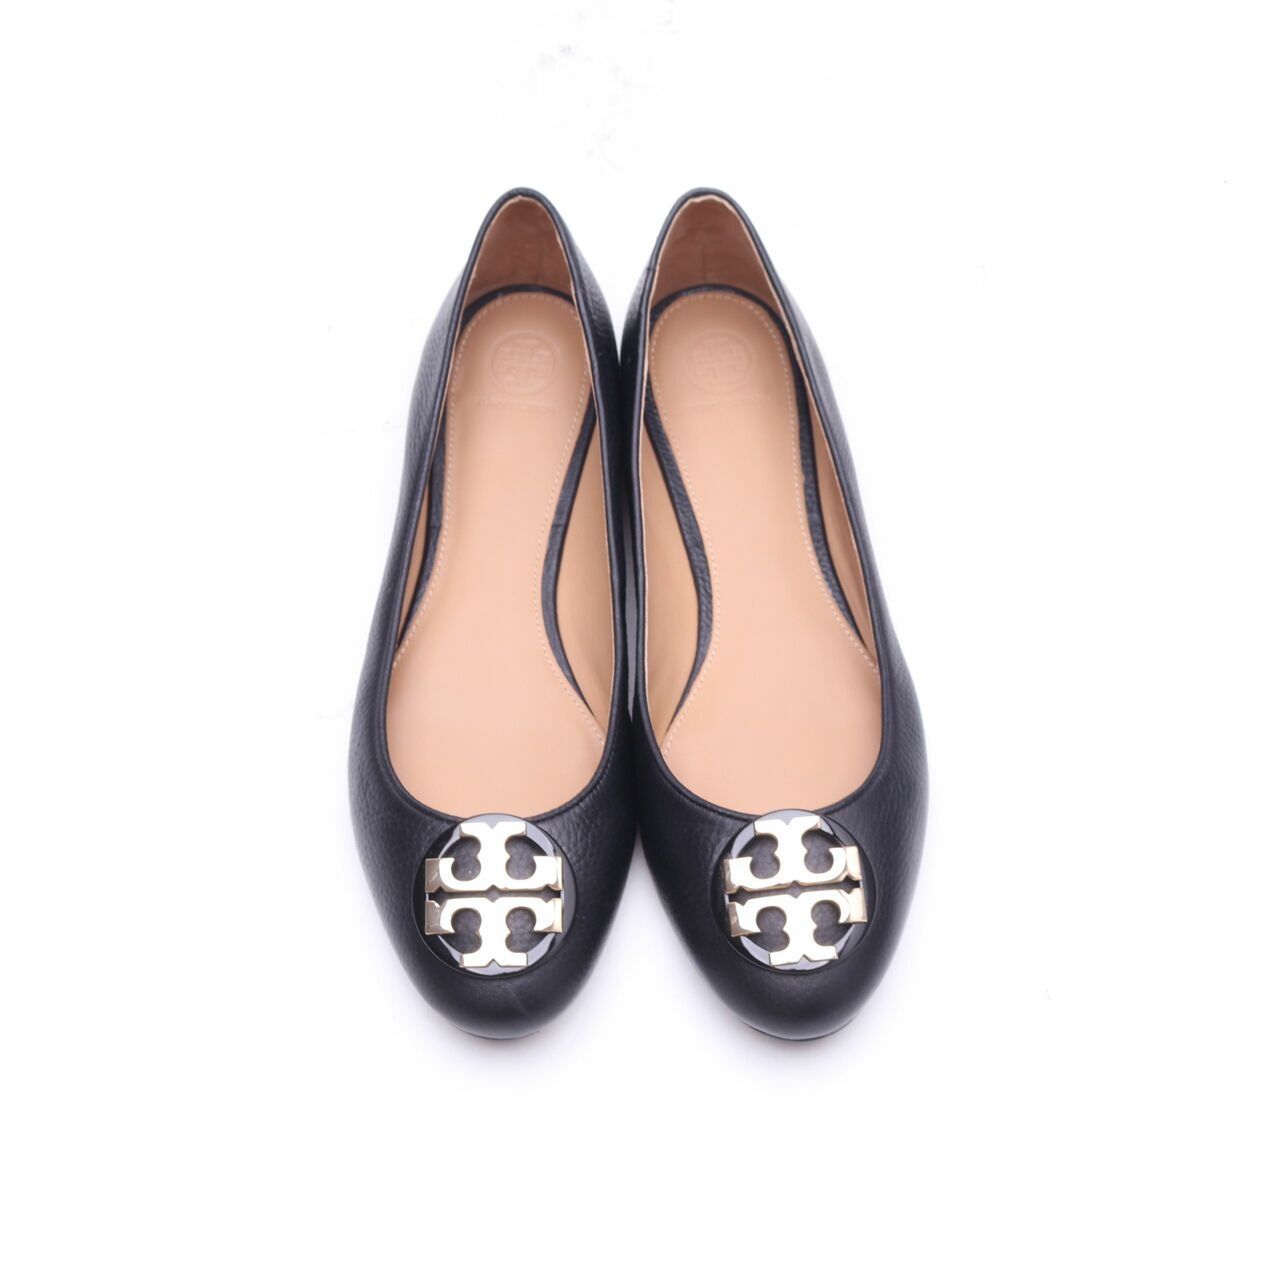 Tory Burch Claire Ballet Perfect Black Flats Shoes 